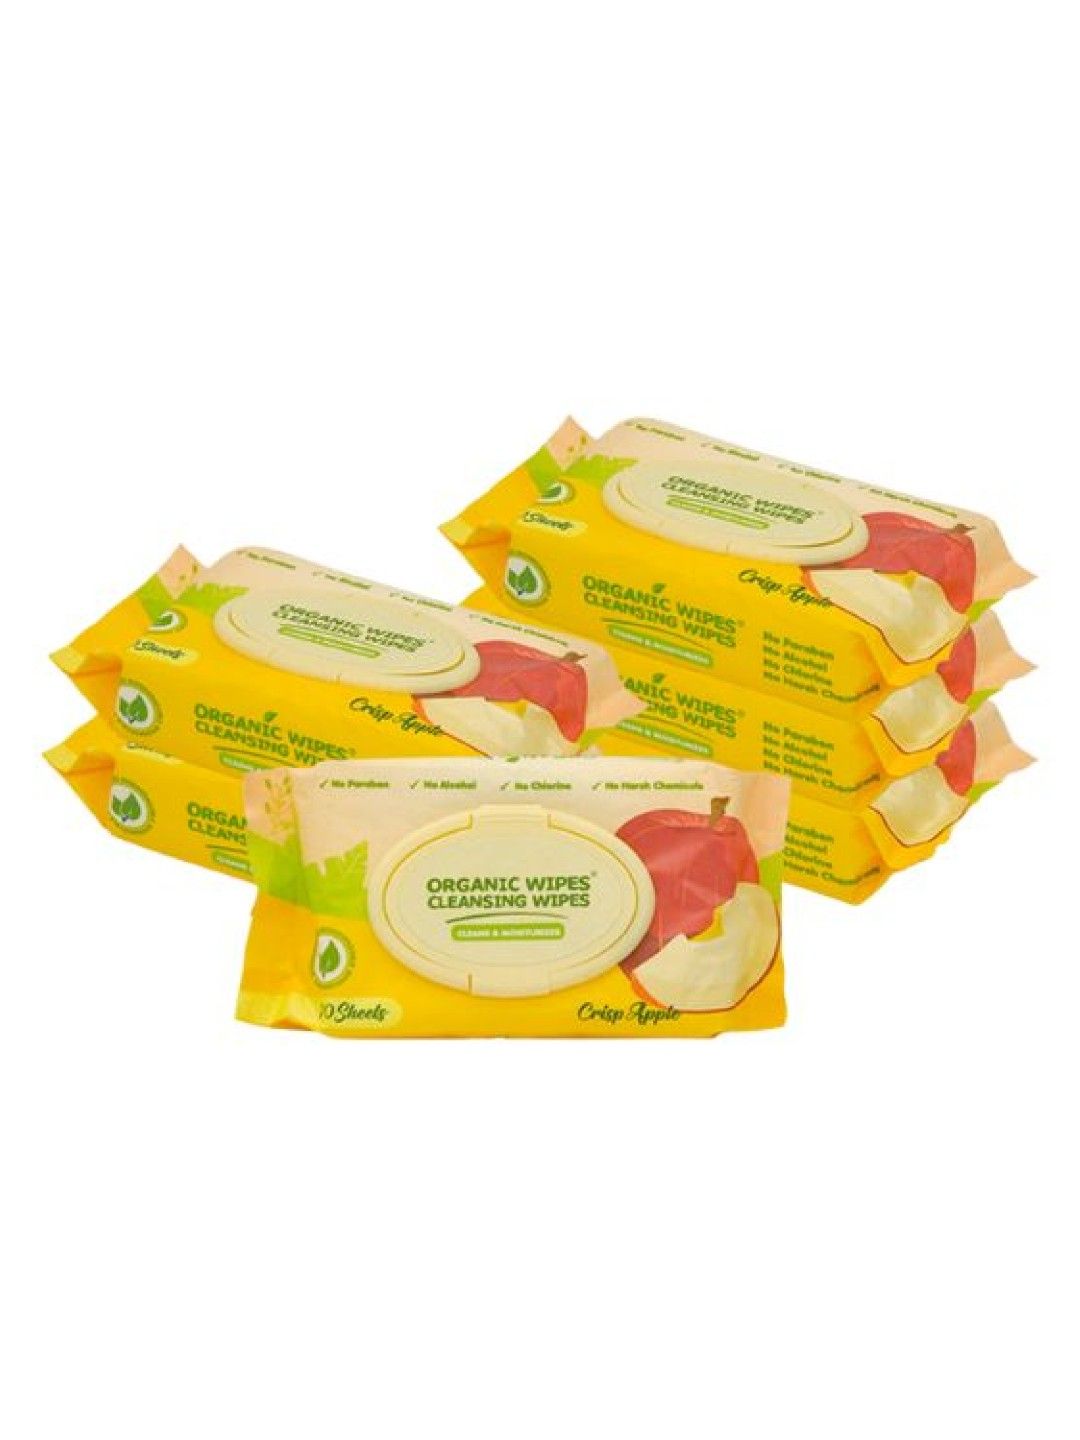 Organic Baby Wipes Organic Wipes Cleansing Wipes Crisp Apple (70s x 6-pack)